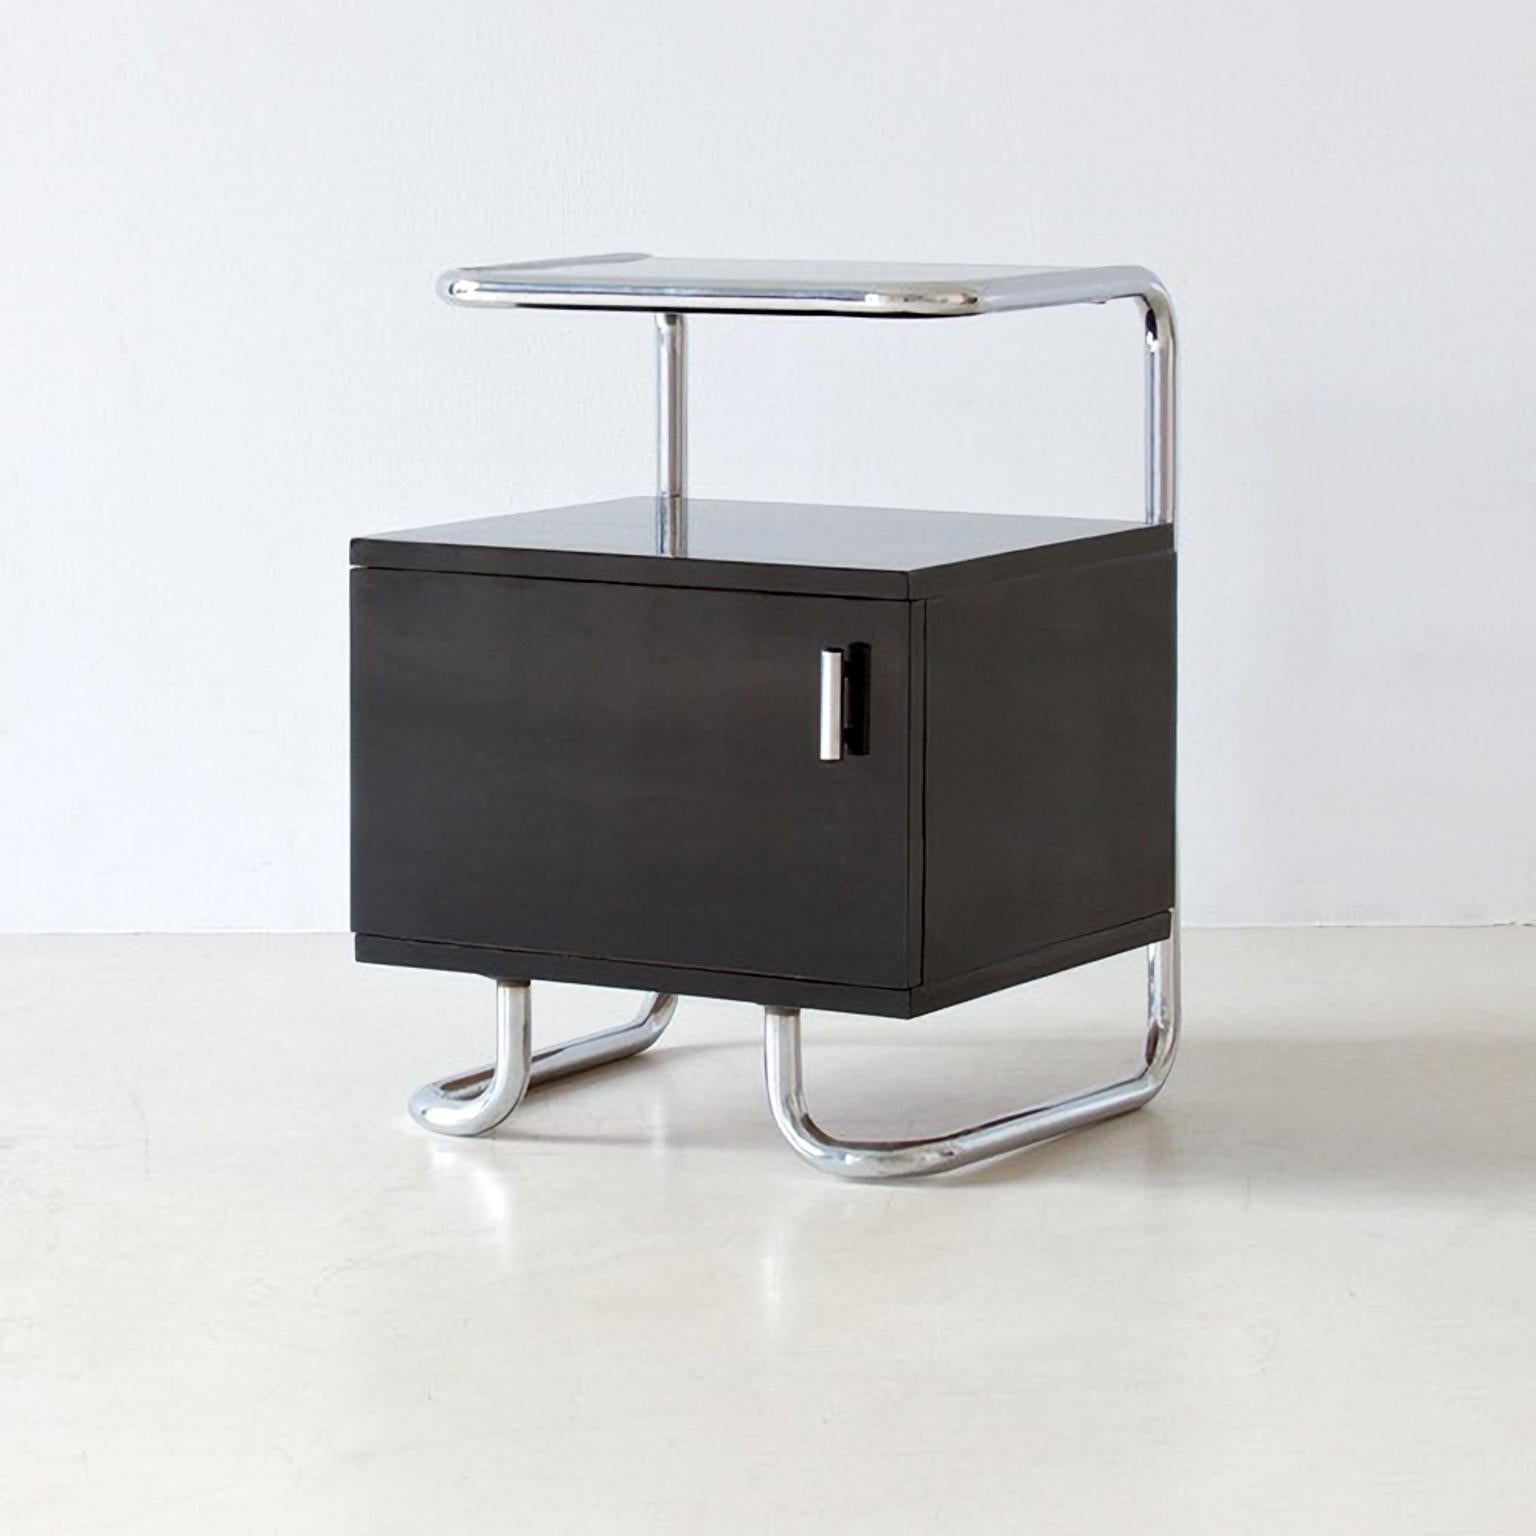 Modern Art Deco Bedside Cabinets in Black Glossy Lacquered Wood and Chromed Steel, 1930 For Sale